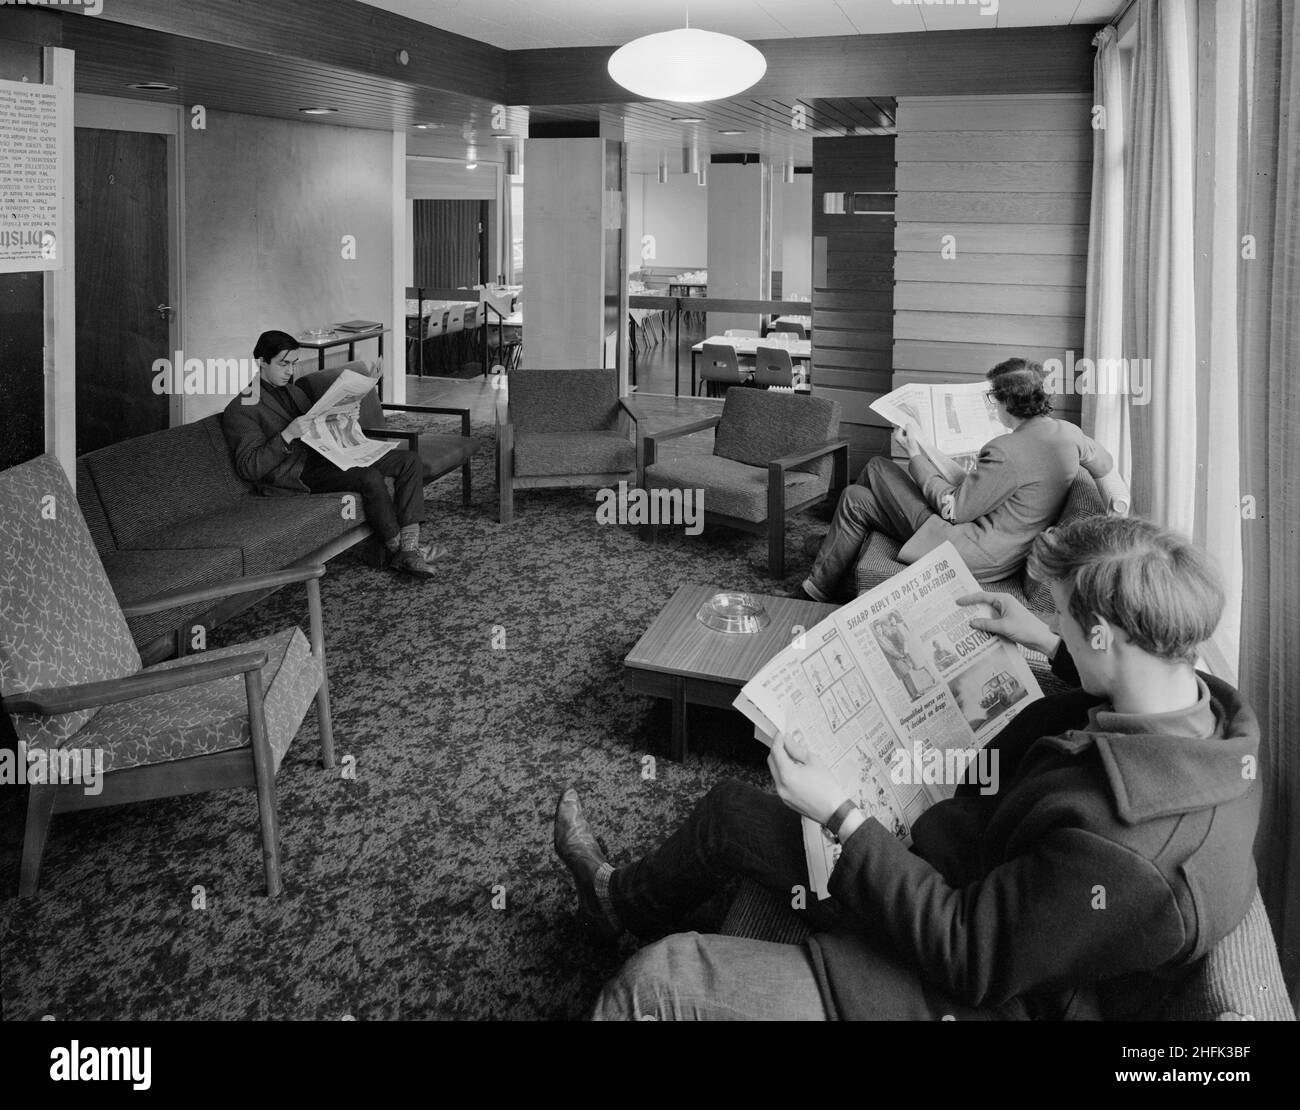 Parson's Field House, Durham University, Durham, County Durham, 08/12/1965. Three men reading newspapers in the students' common room in Parson's Field House halls of residence at Durham University. The Parson's Field House halls of residence were designed by the architects Bernard Taylor and Associates and were built by the Northern Region of Laing's Construction Company. Three four-storey blocks were constructed using Laingwall prefabricated concrete units, including block one which contained the main dining room and common rooms on the ground floor with study bedrooms on the upper floors, b Stock Photo